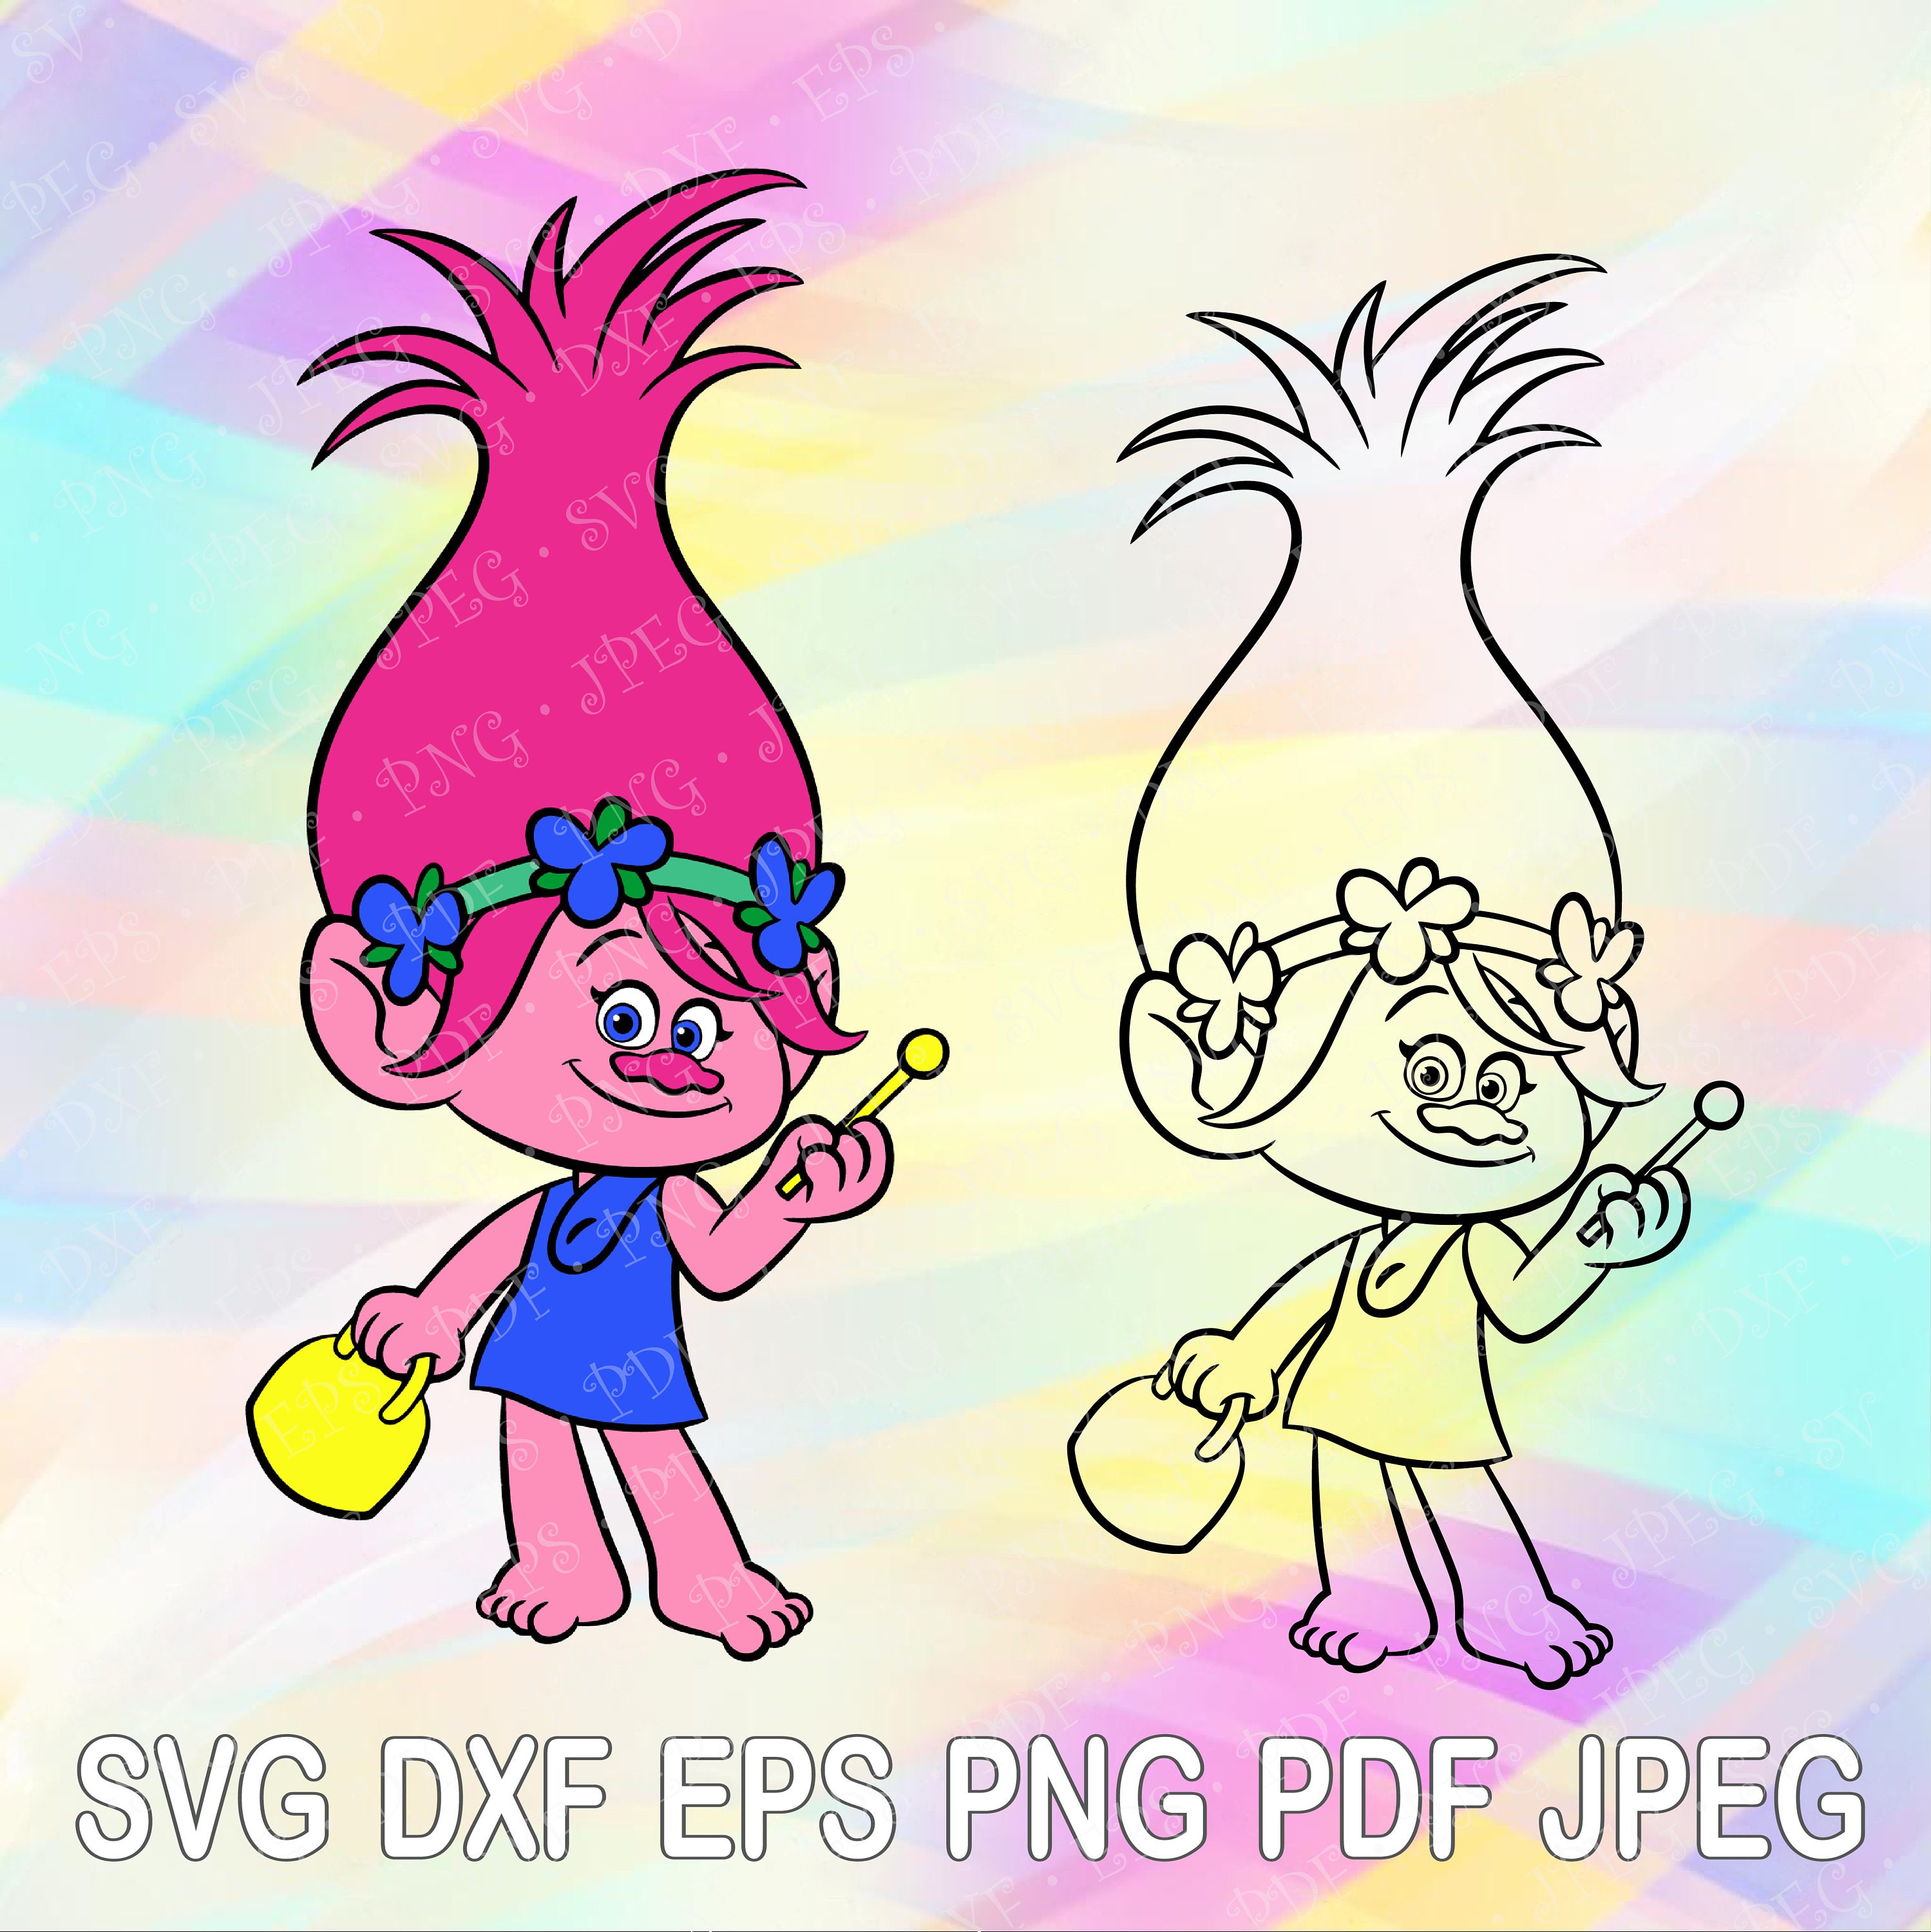 Download SVG DXF PNG Princess Poppy Trolls Movie Layered Cut Files ...